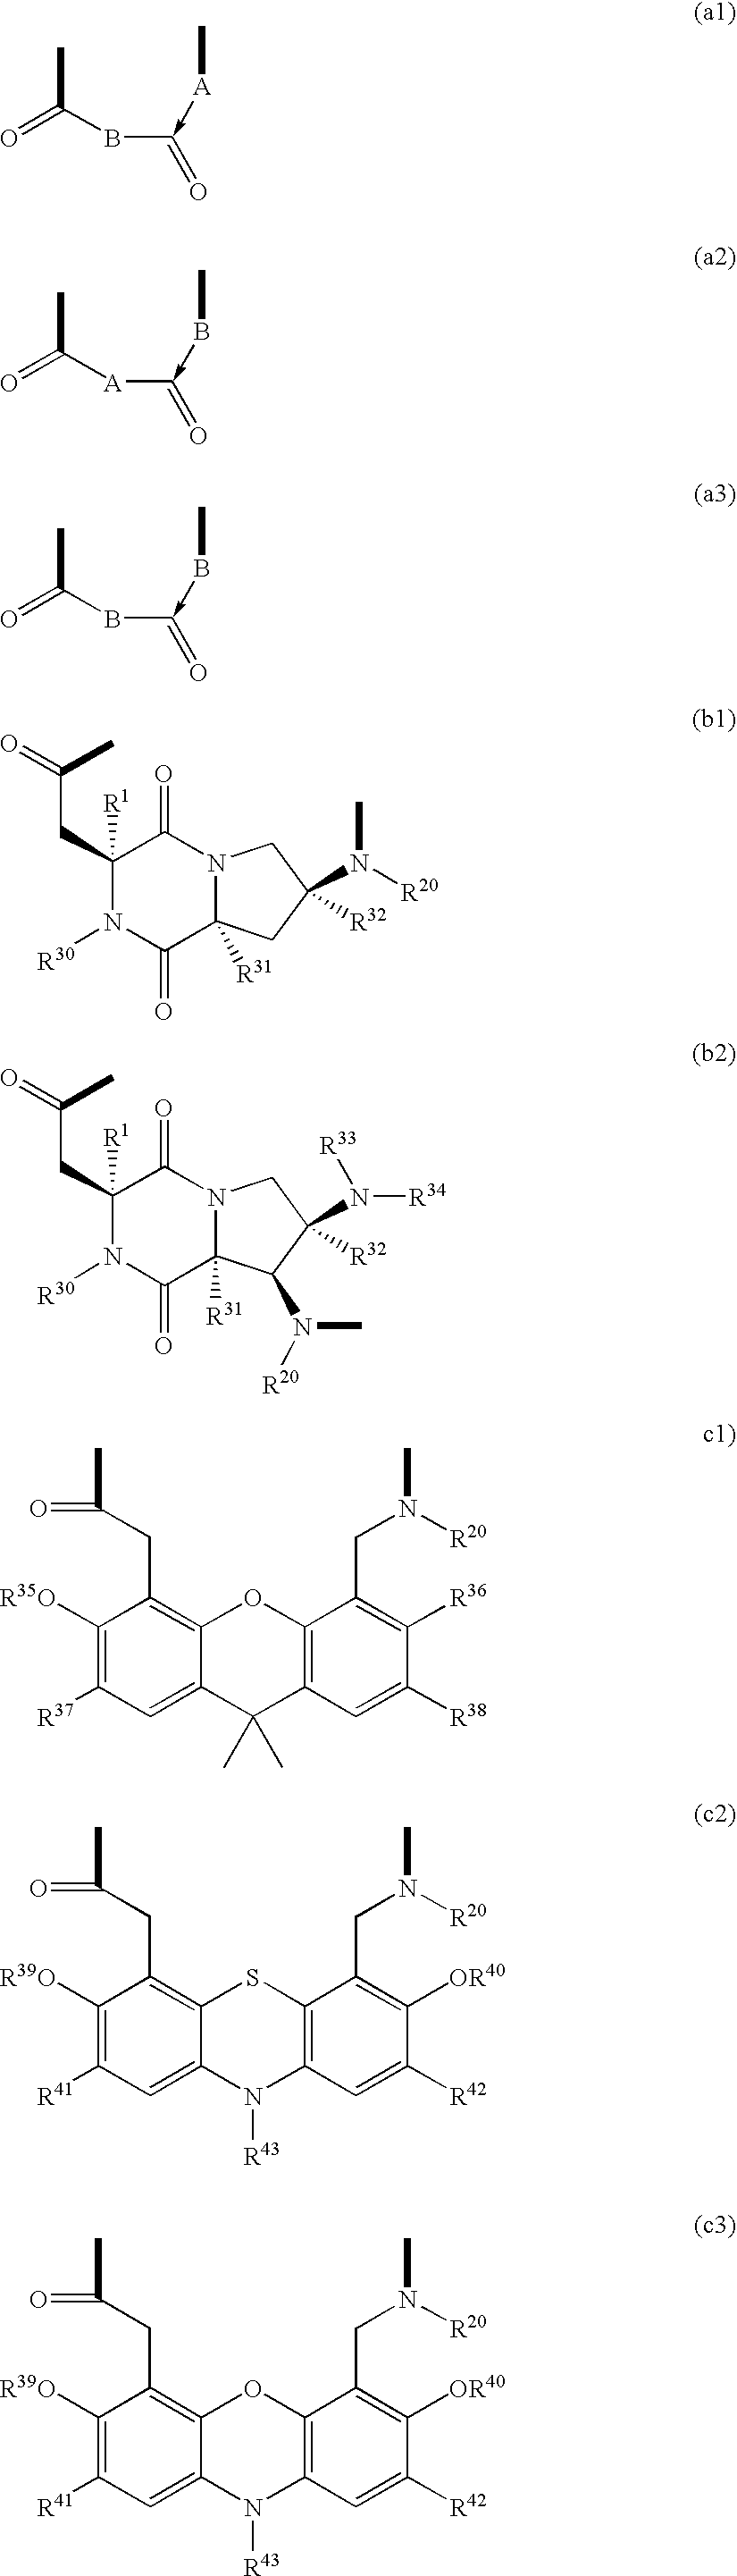 Template-fixed beta-hairpin peptidomimetics with protease inhibitory activity